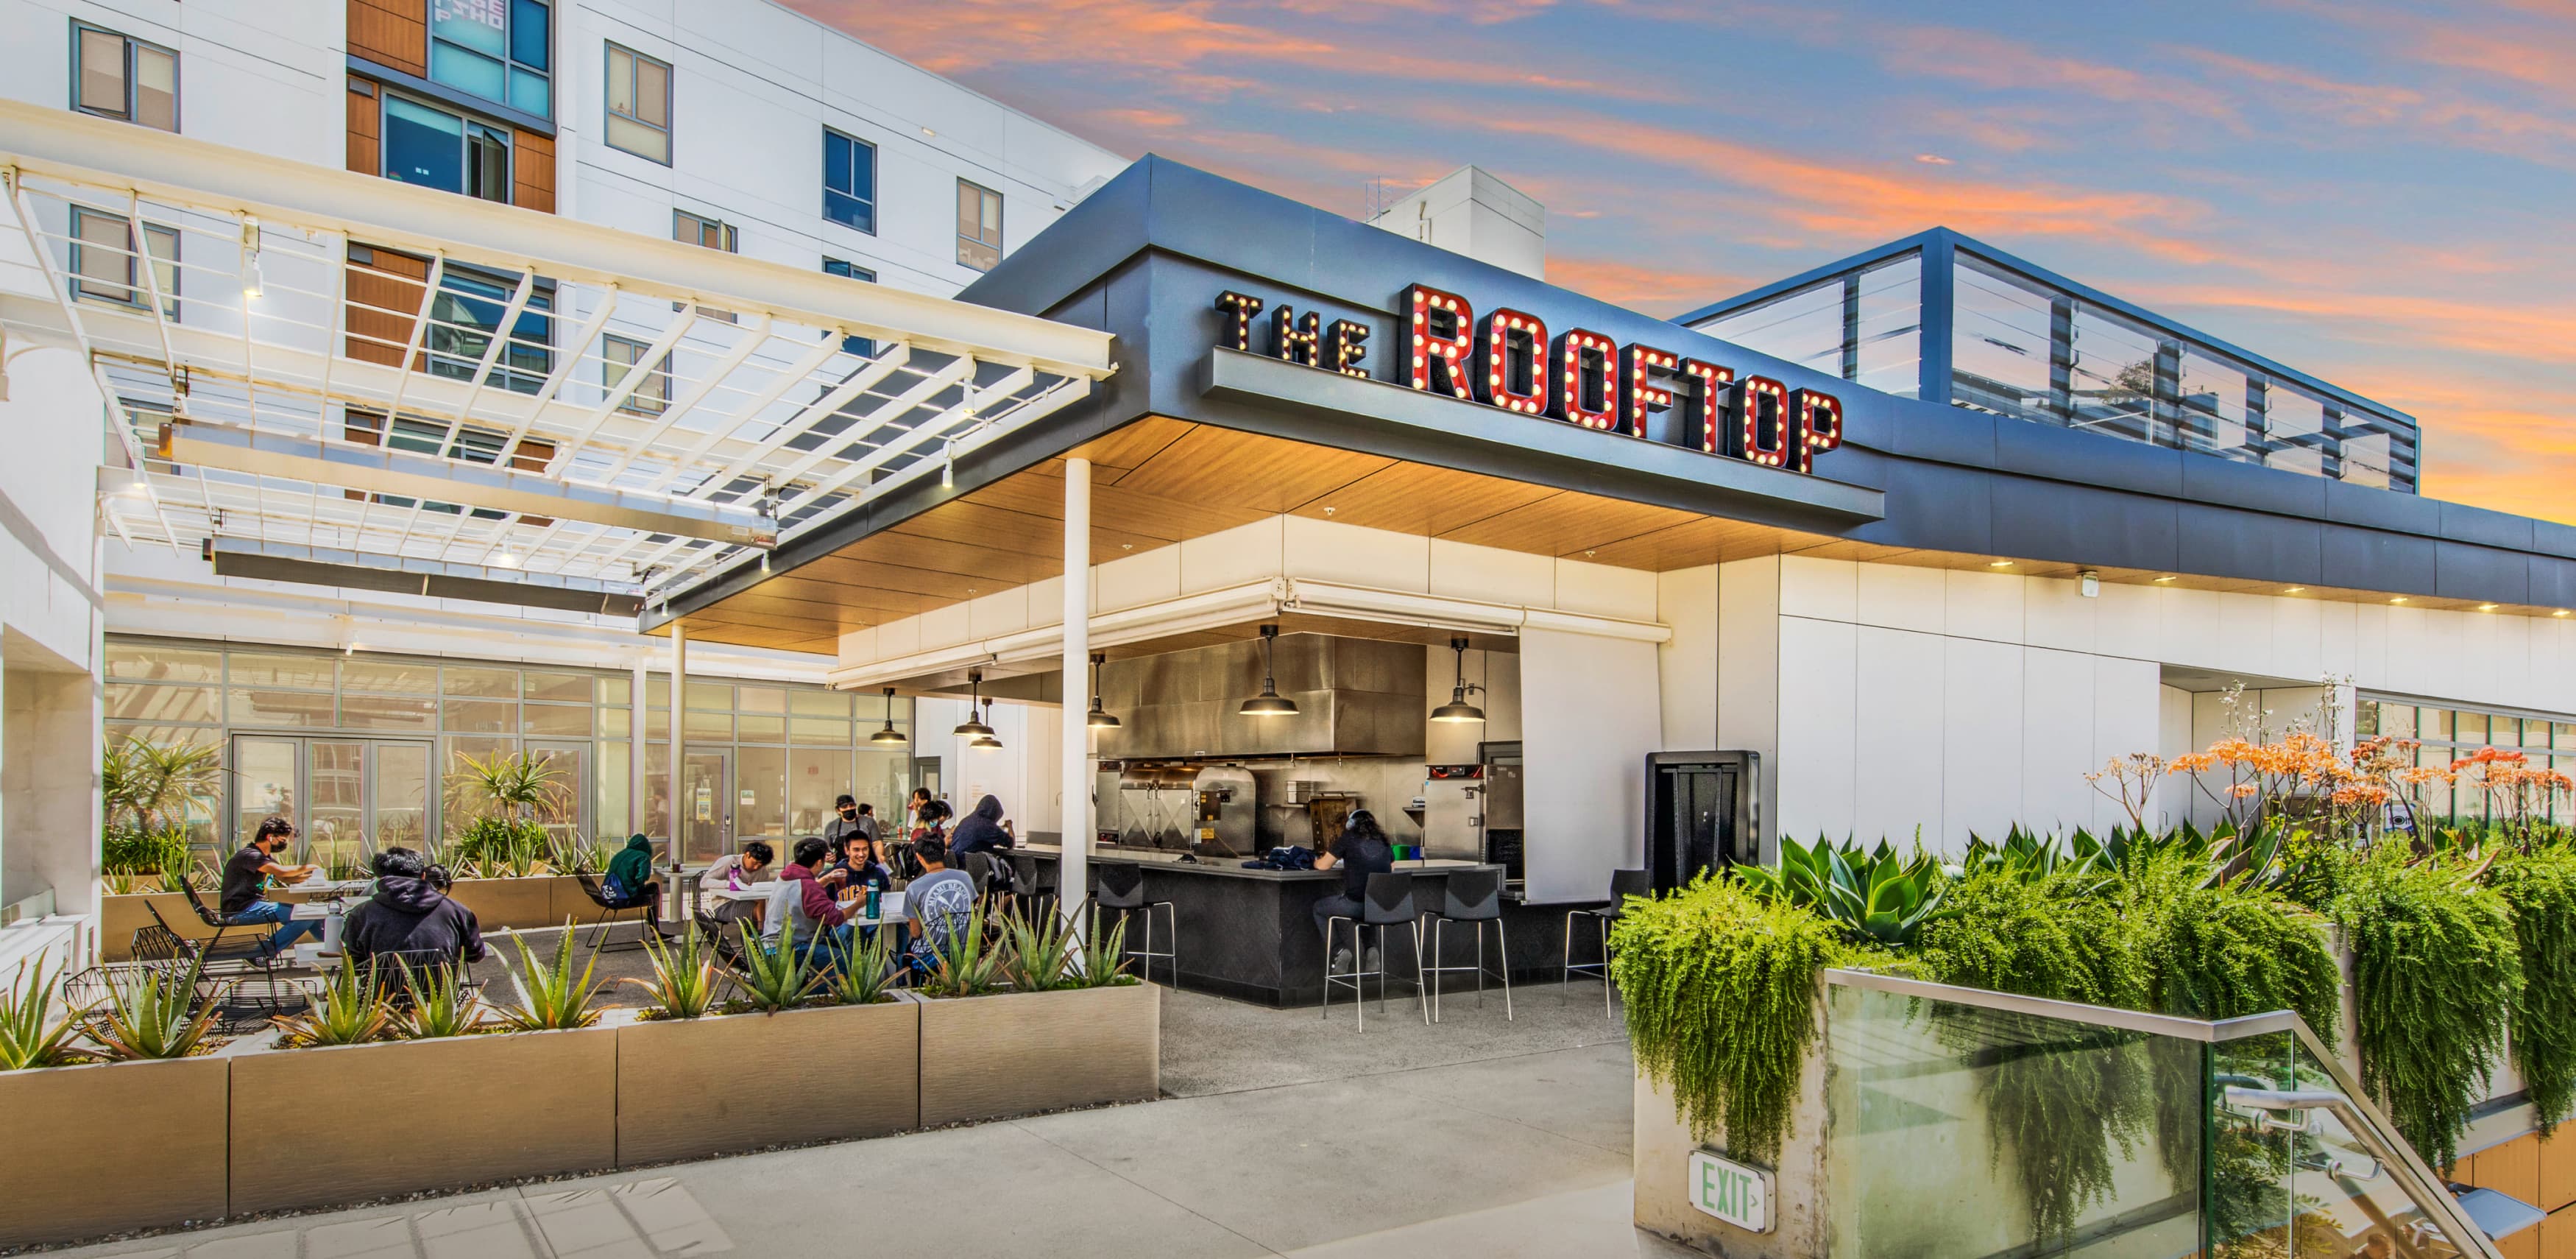 "THE ROOFTOP" open channel letter identity with exposed warm light bulbs sign for UC San Diego Sixth College dining hall by RSM Design in San Diego, California.